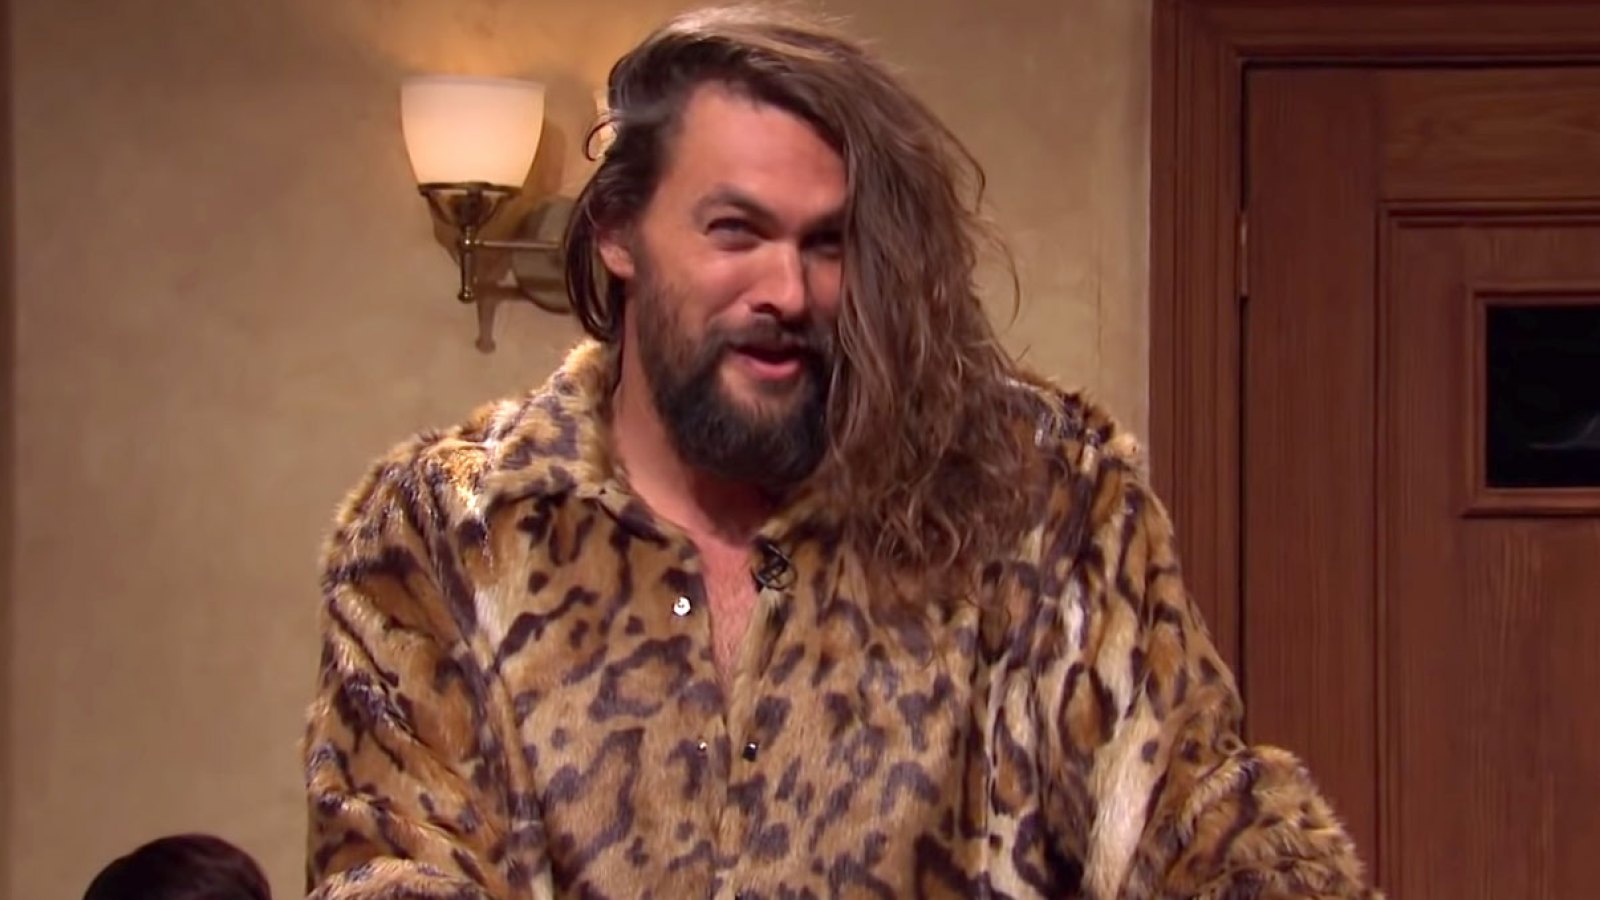 Jason Momoa Makes a Surprise Cameo and Rips Open His Shirt